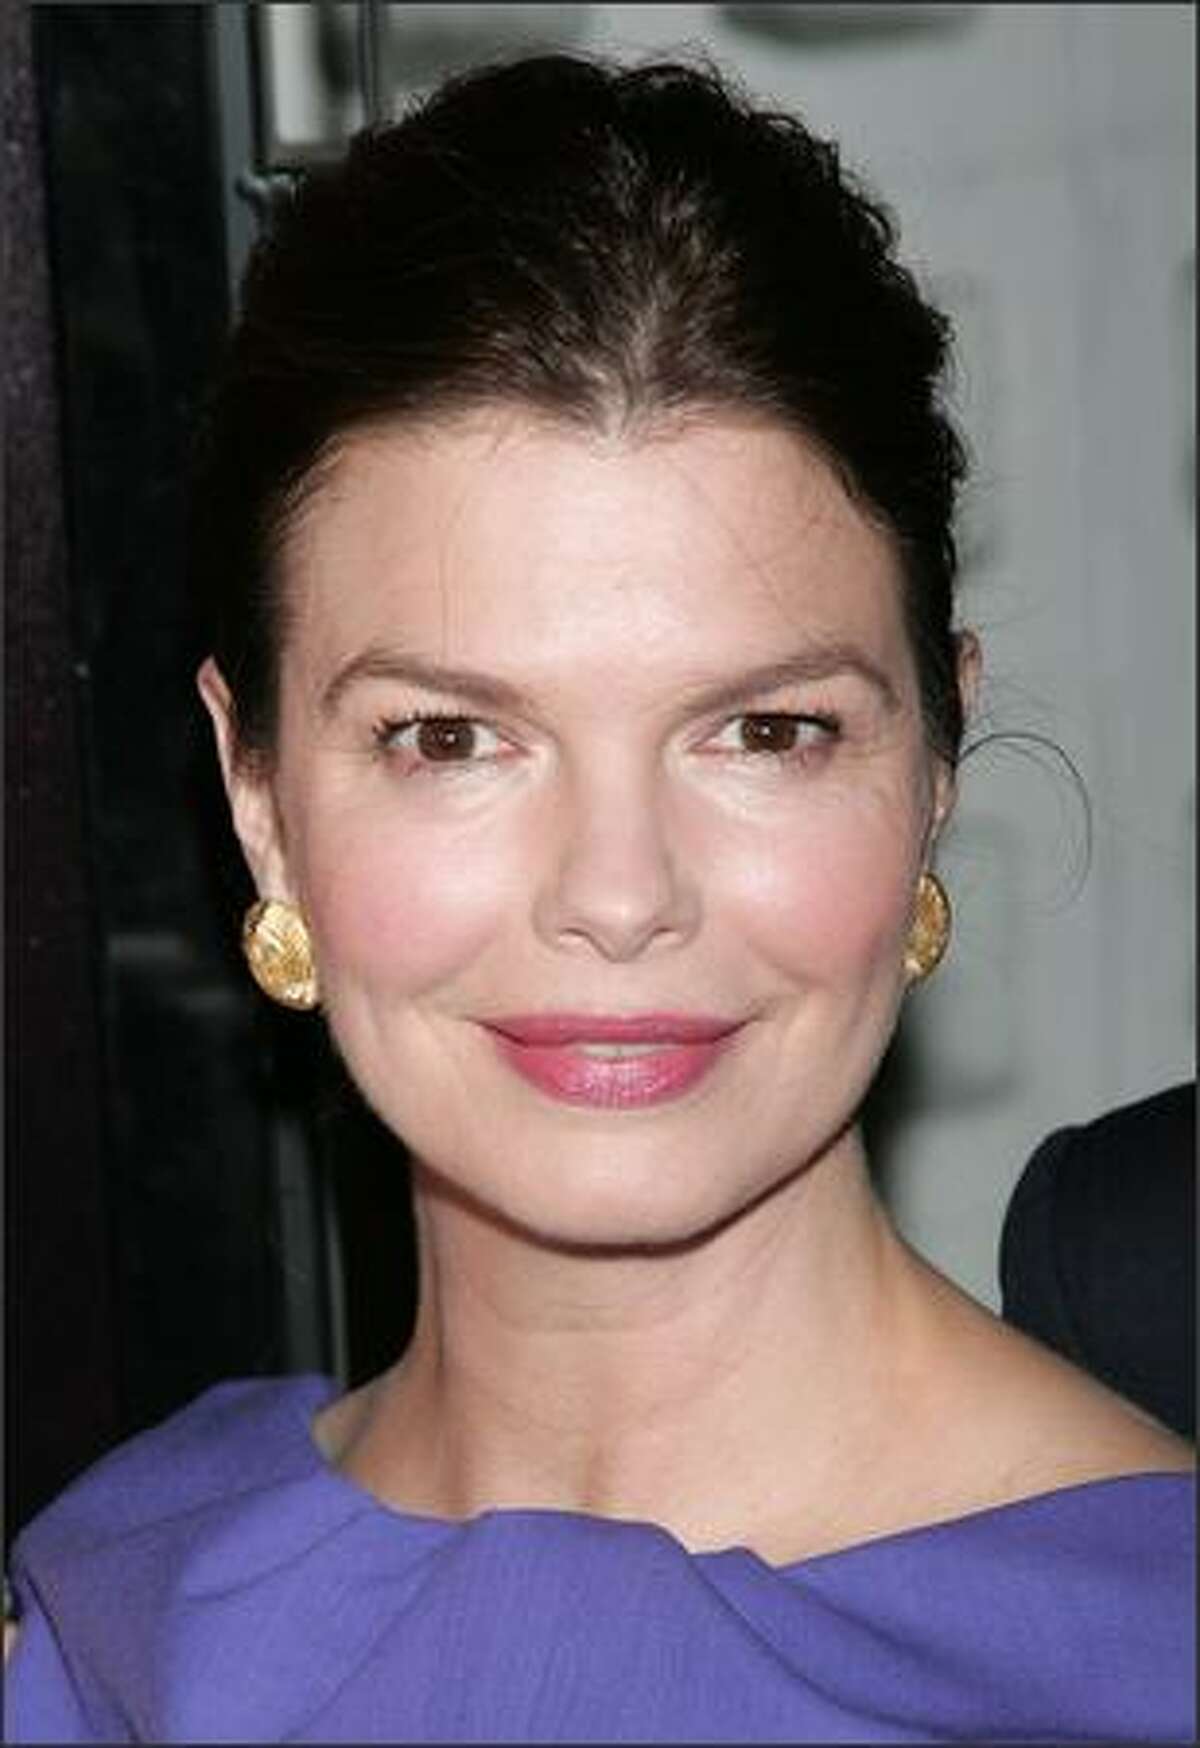 Actress Jeanne Tripplehorn attends the premiere of HBO's "Big Love" 3rd season at the Cinerama Dome January 14, 2009 in Hollywood, California.